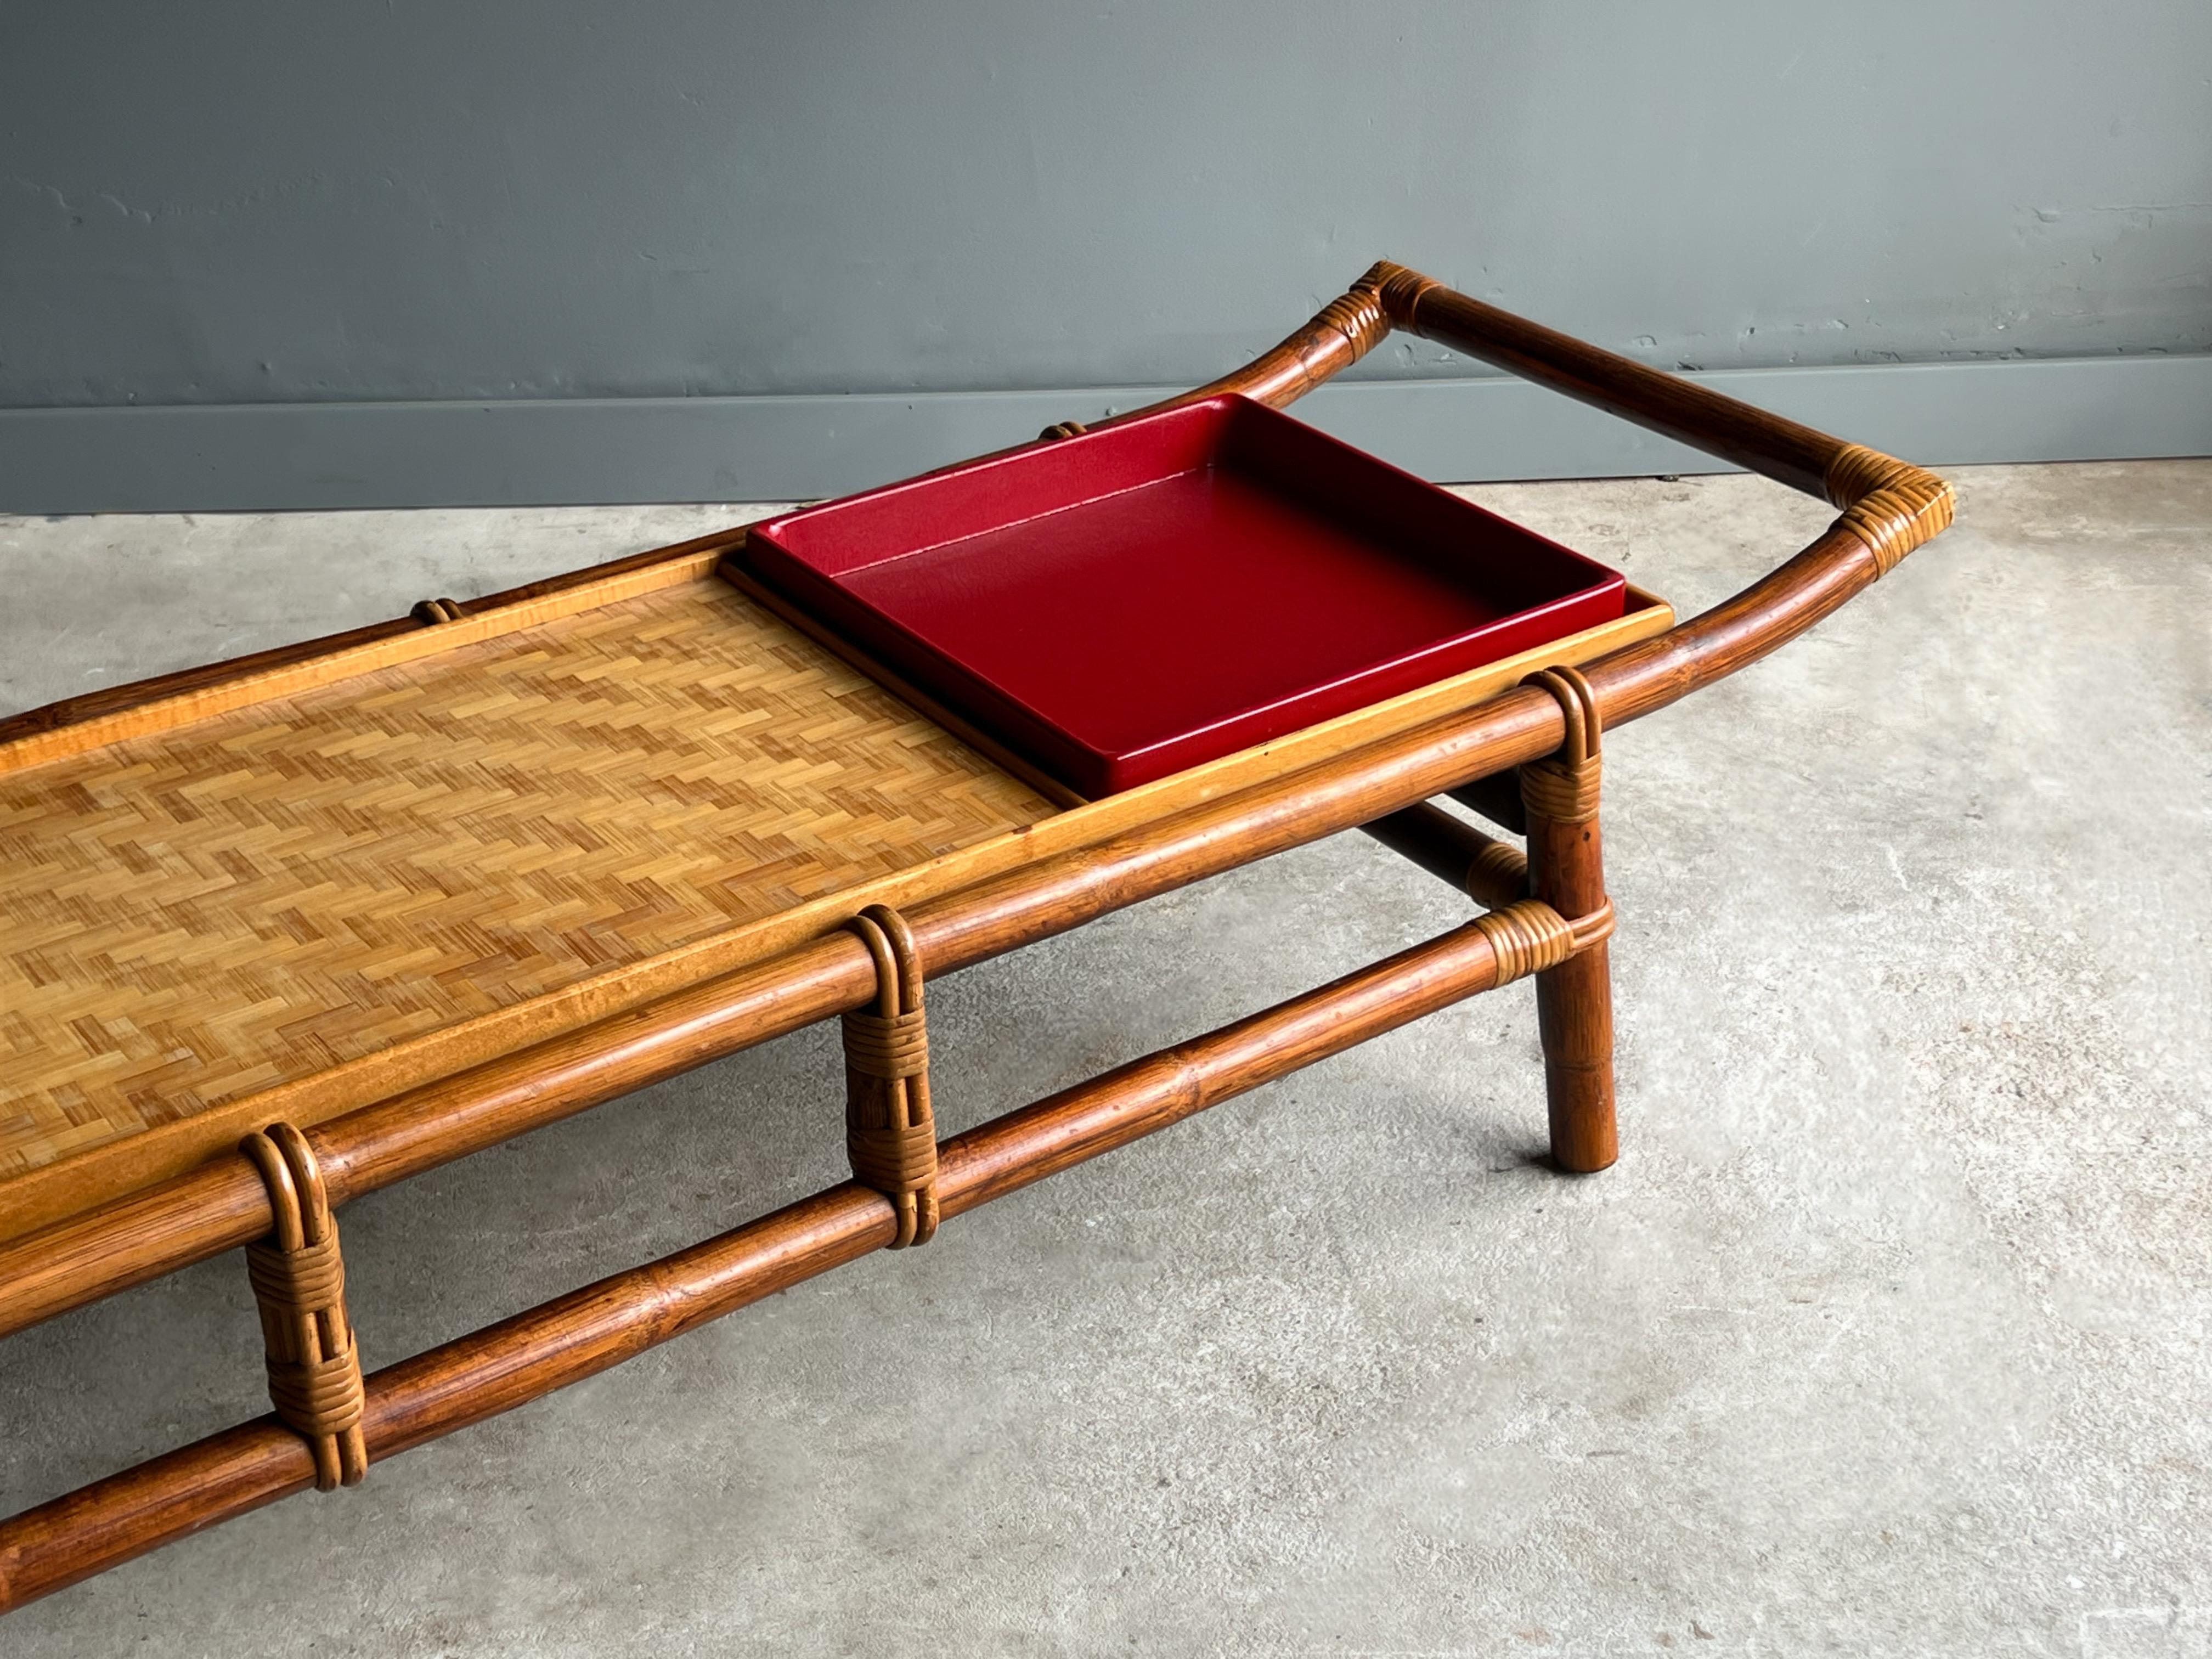 Machine-Made John Wisner for Ficks Reed Coffee Table or Bench, Bamboo and Cane, Circa 1954